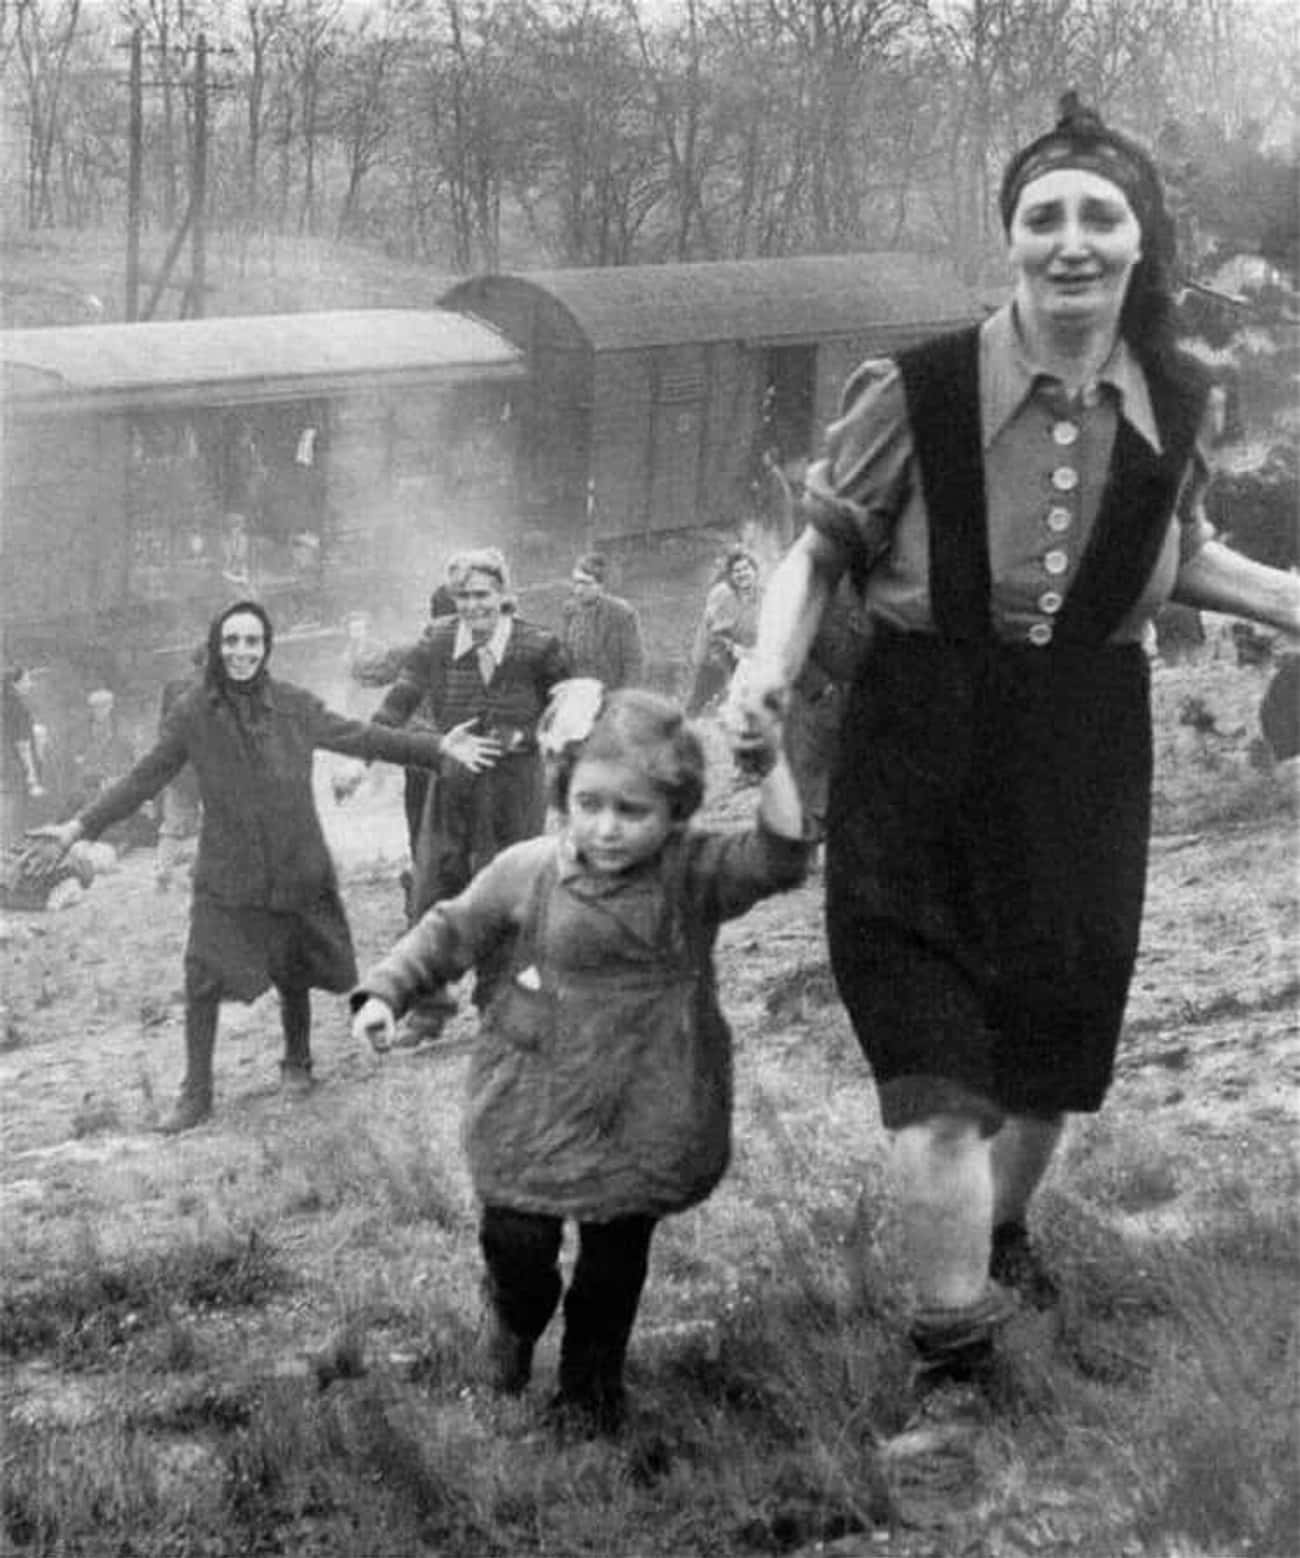 Prisoners Fleeing A Train That Was Taking Them To Their Execution - 1945